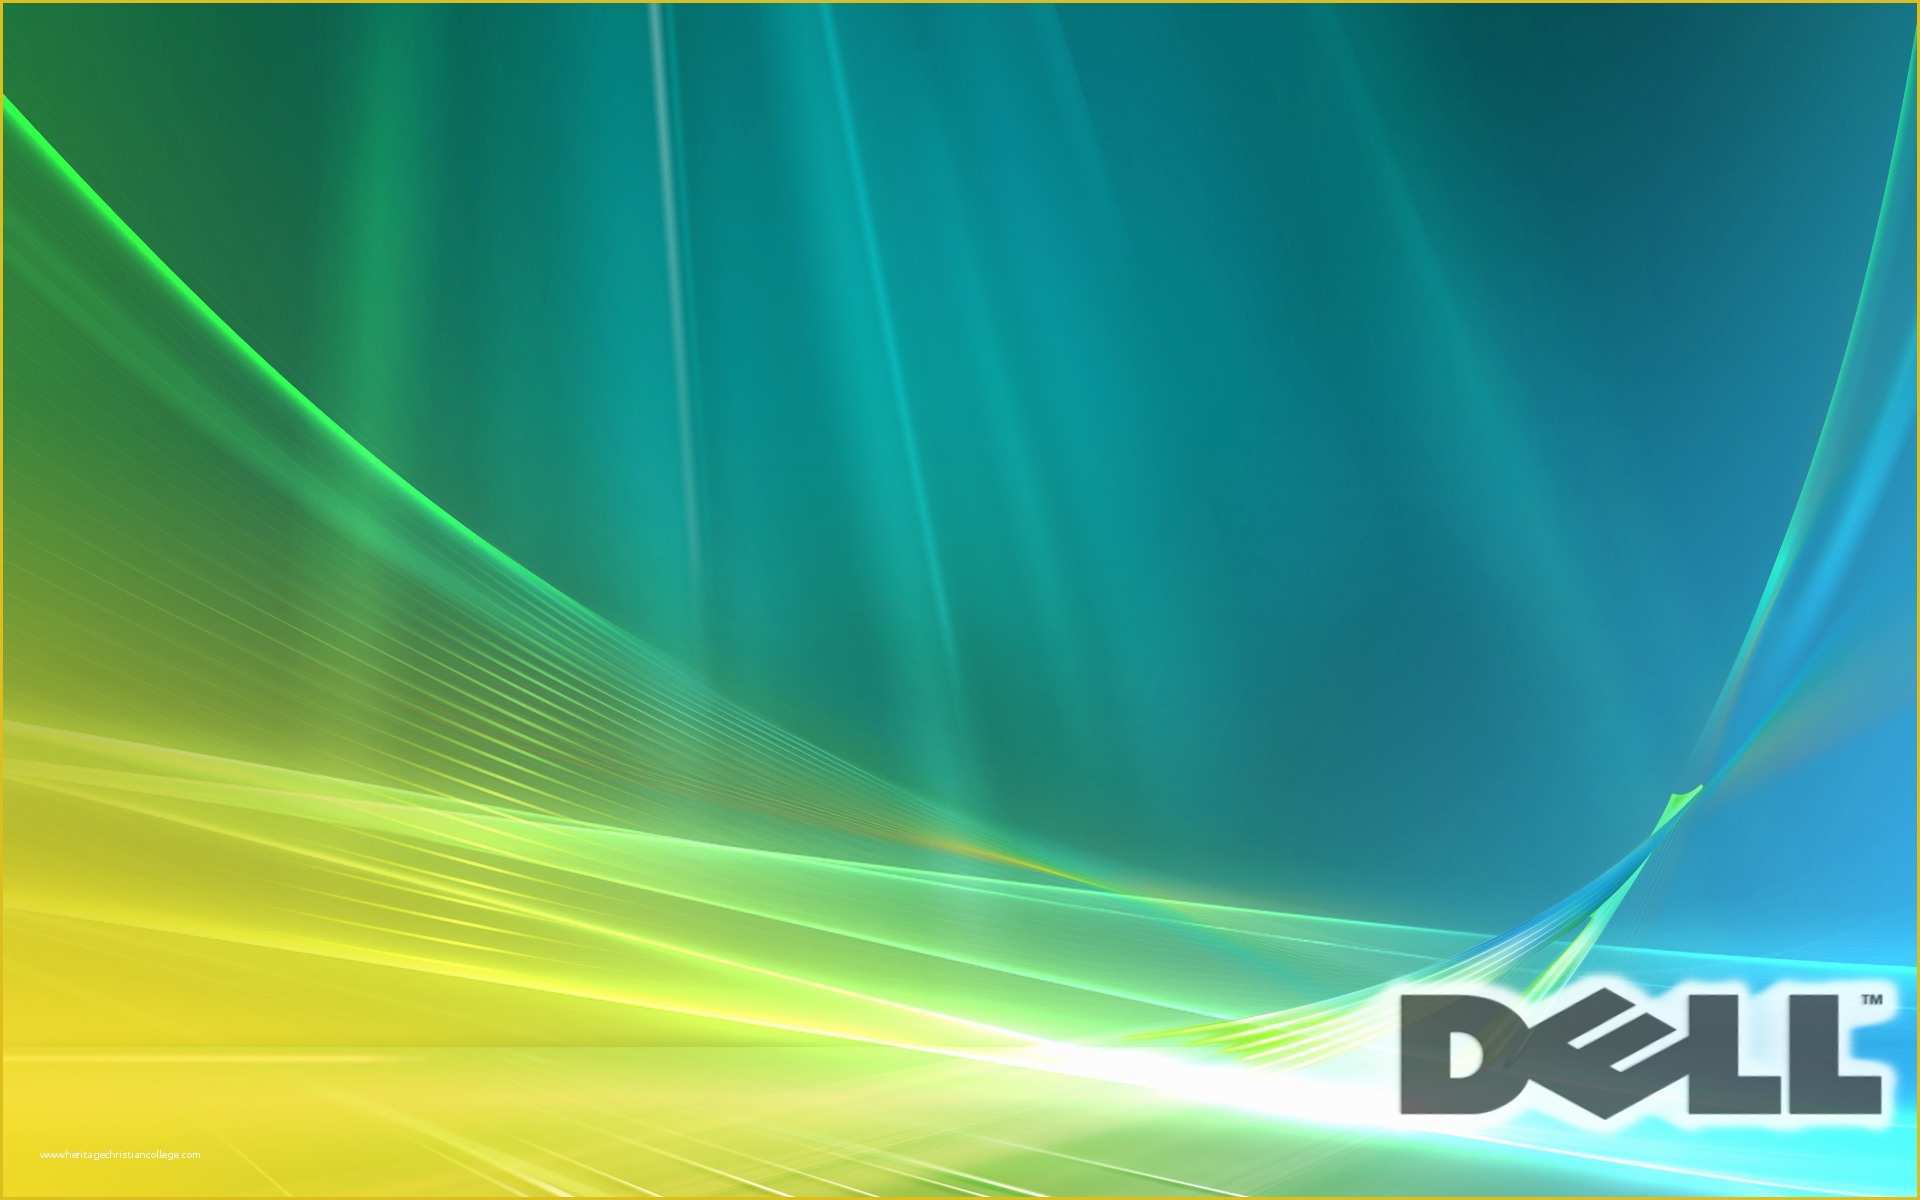 Free Background Templates Of Dell Backgrounds Free Download